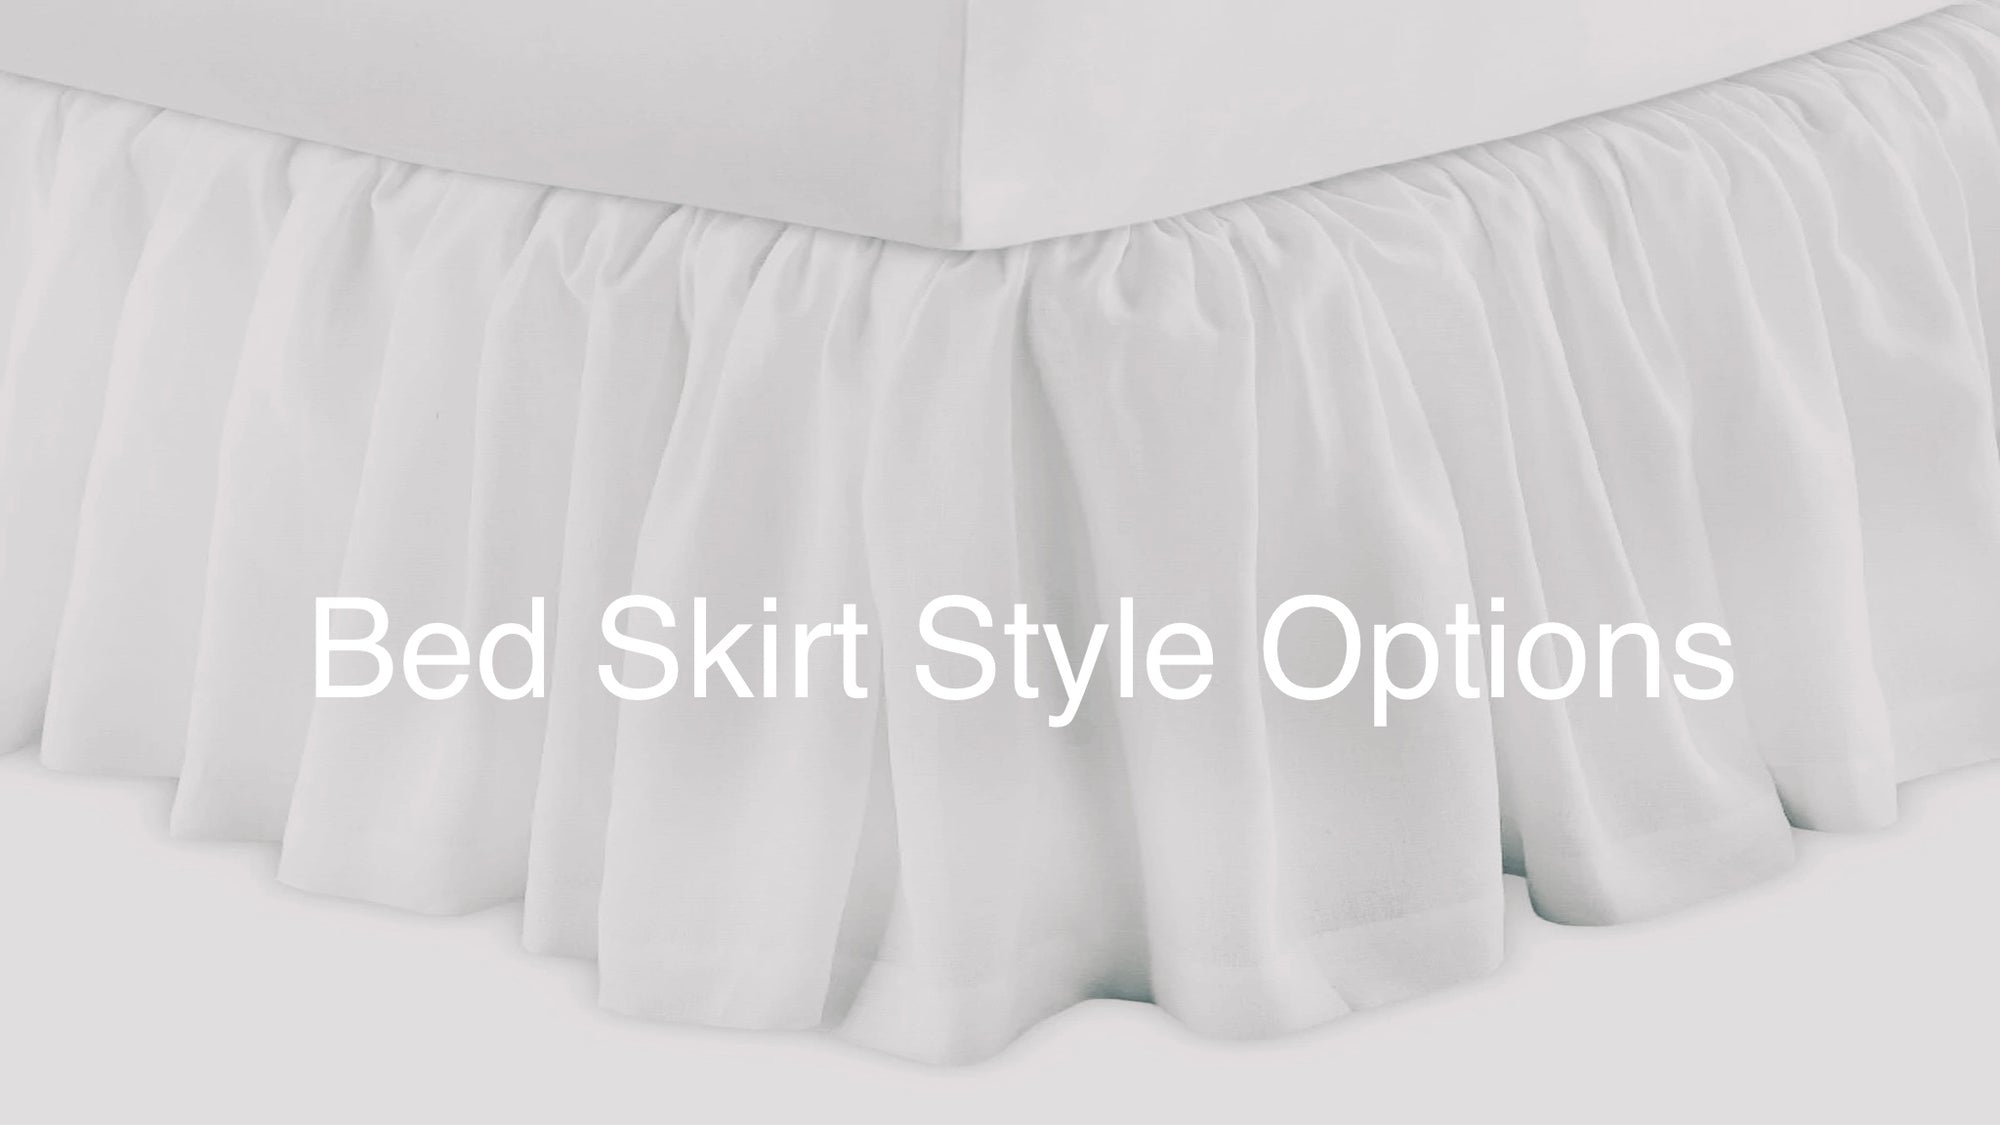 White Bed Skirt with text Bed Skirt Style Options